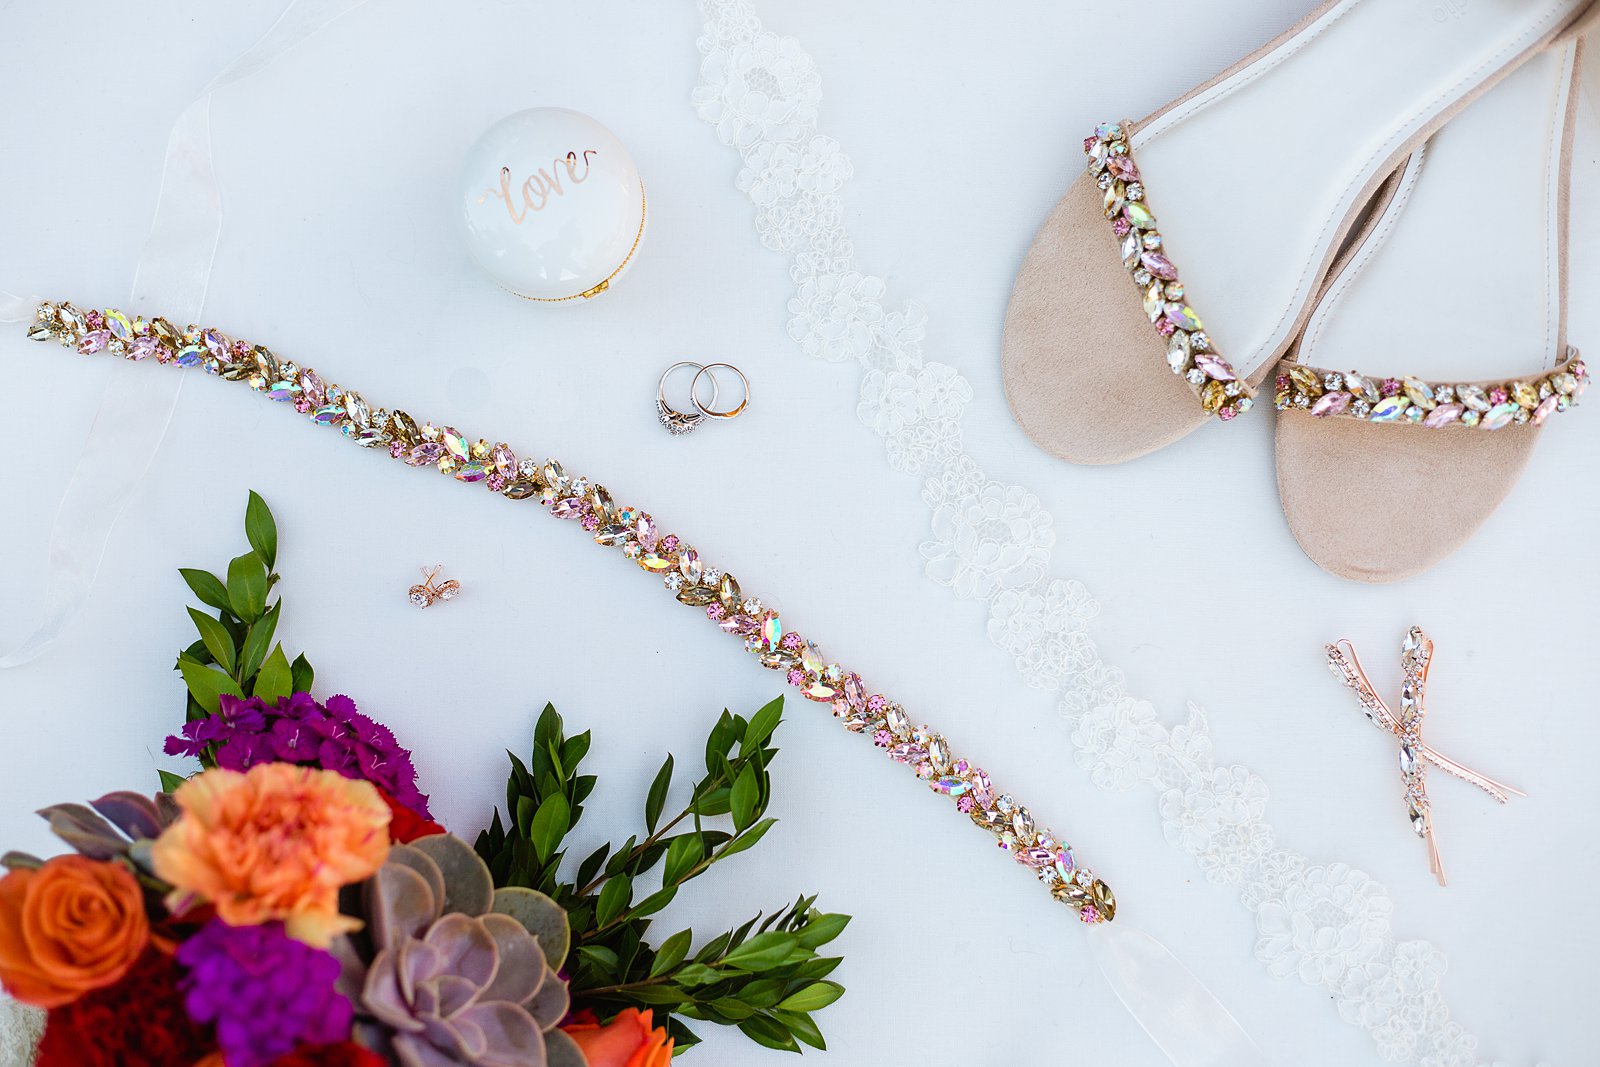 Bride's rose gold wedding details of shoes, rhinestone belt, hair clips, and earrings by PMA Photography.